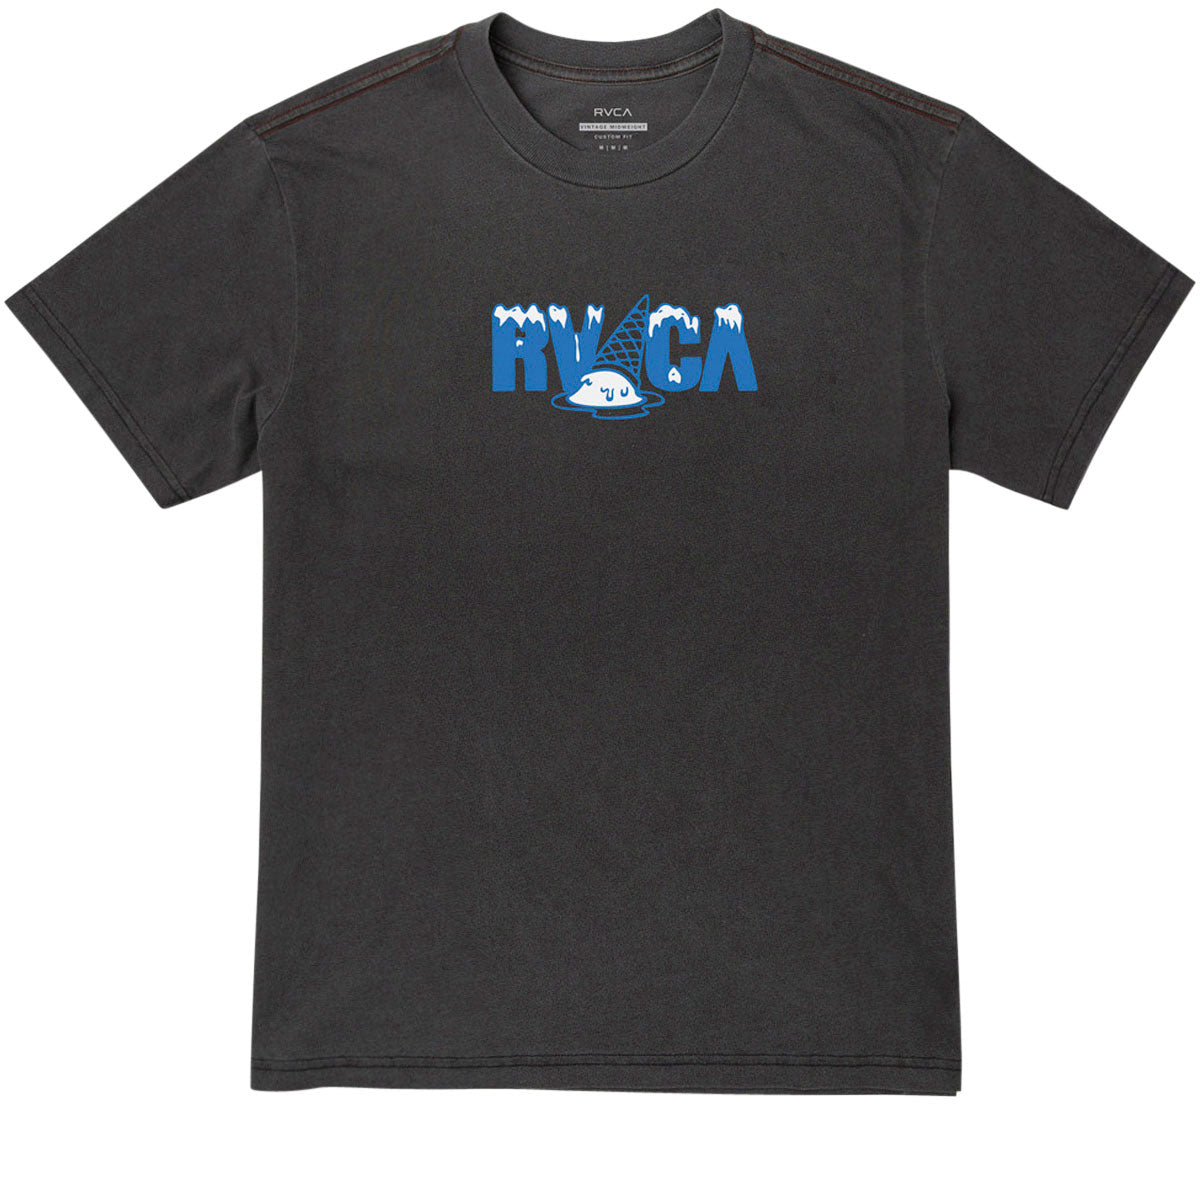 RVCA Melted T-Shirt - Black image 1